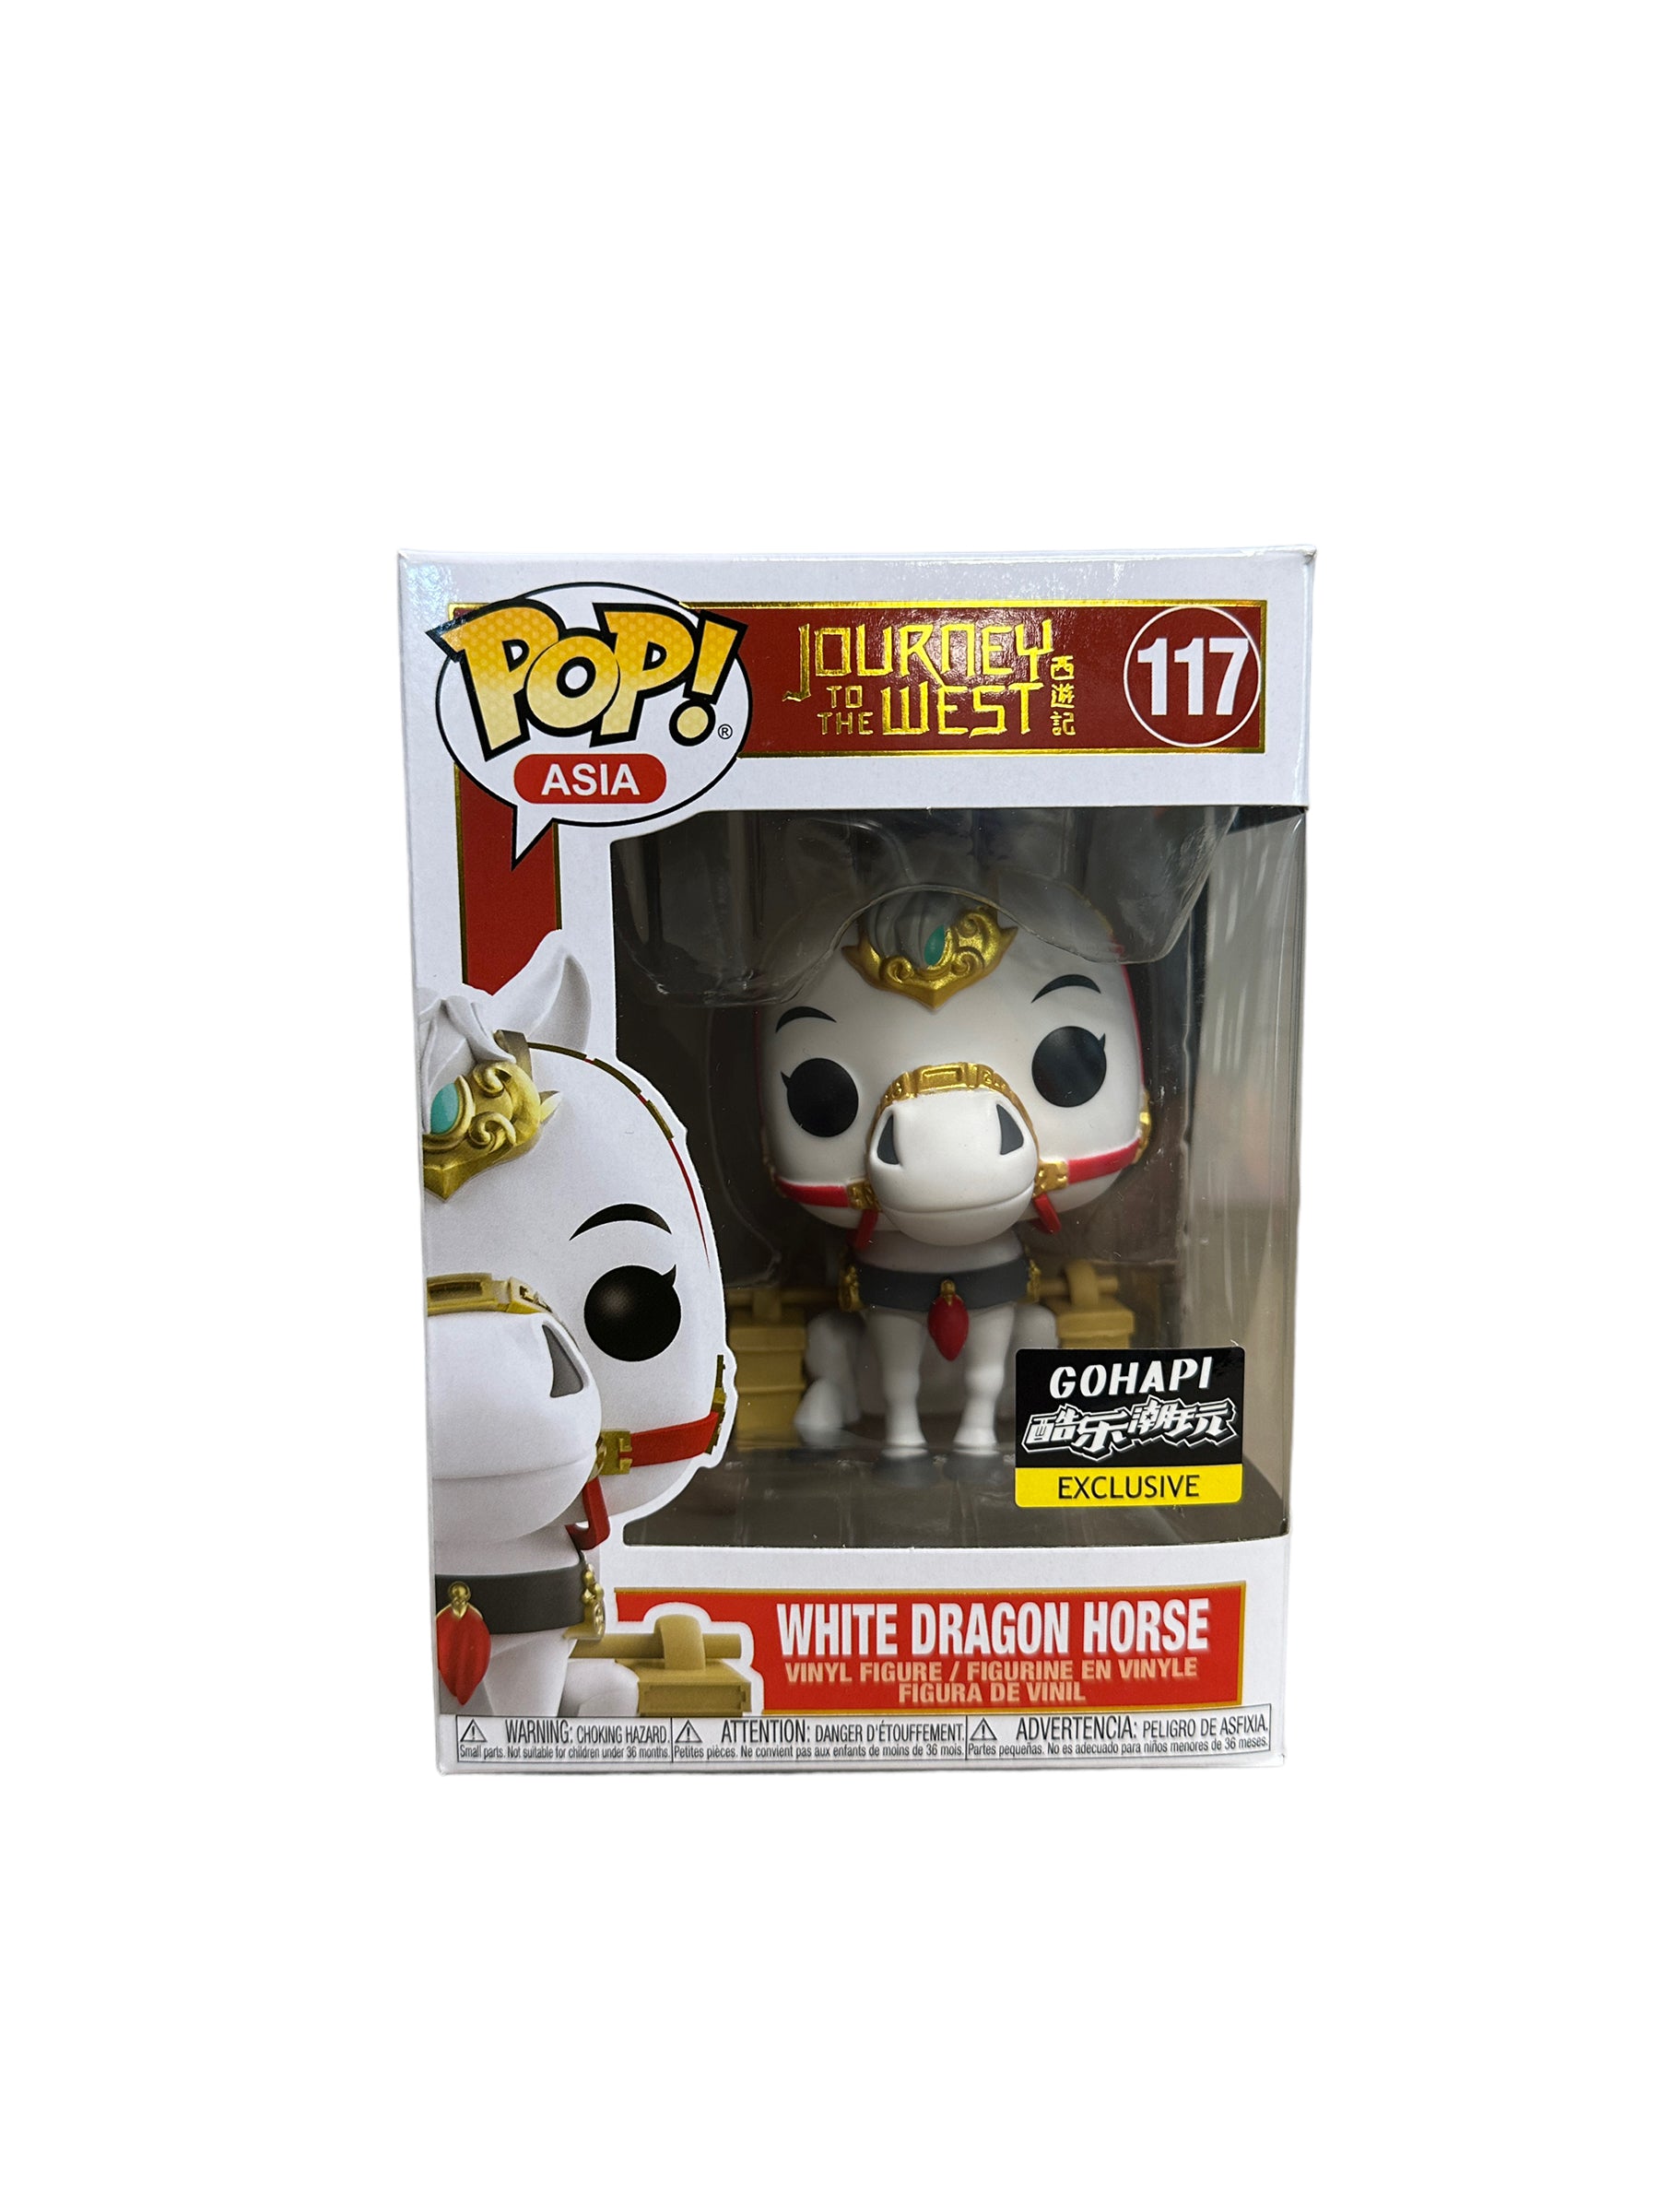 White Dragon Horse #117 Funko Pop! - Journey to the West - Gohapi Exclusive - Condition 8/10